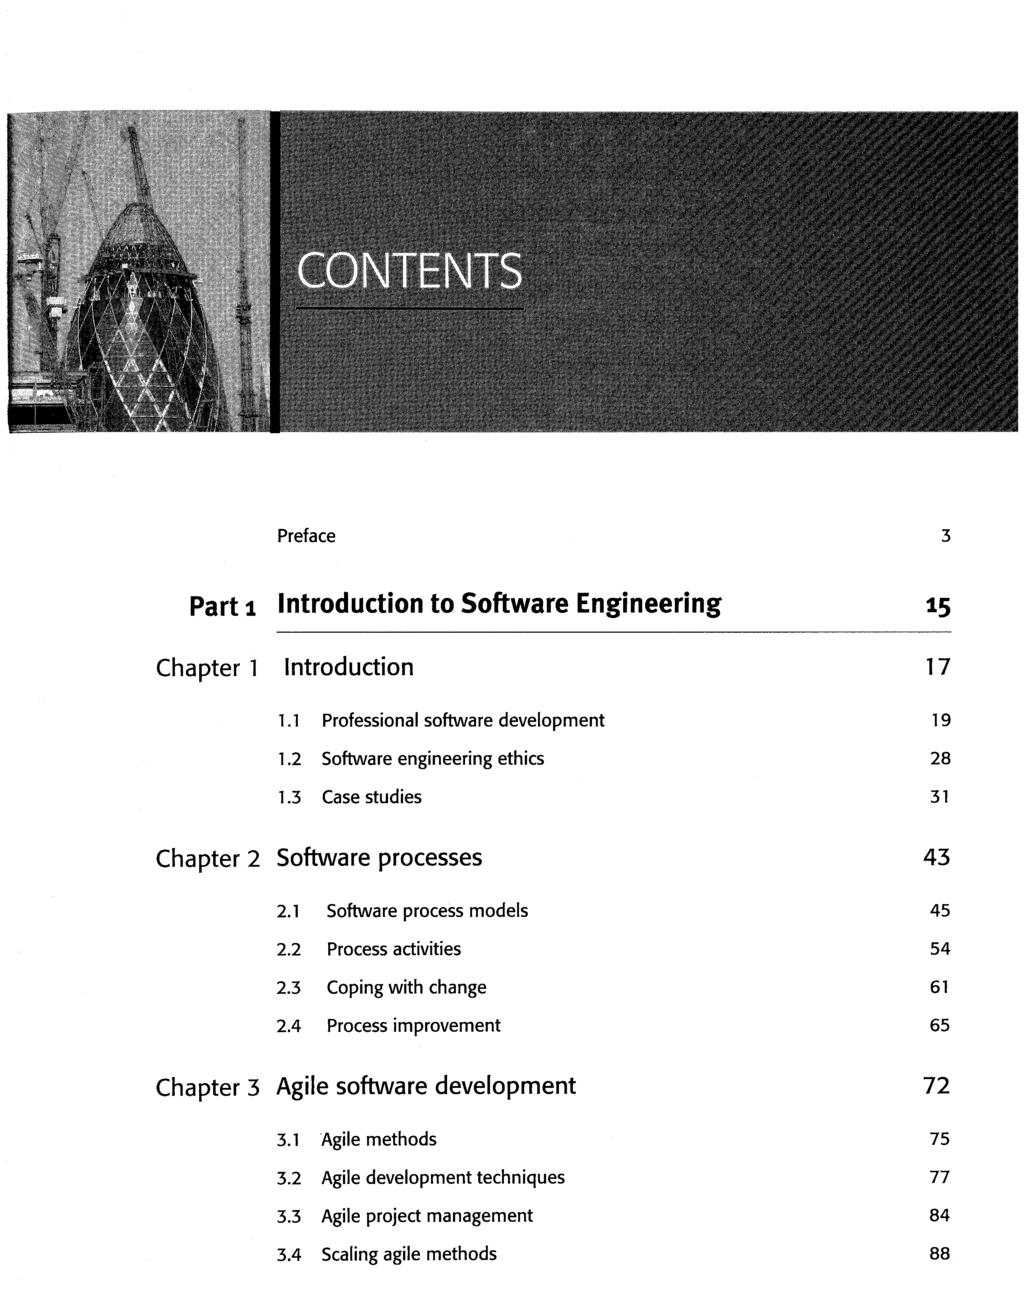 Preface 3 Part 1 Introduction to Software Engineering 15 Chapter! Introduction 17 1.1 Professional software development 19 1.2 Software engineering ethics 28 1.